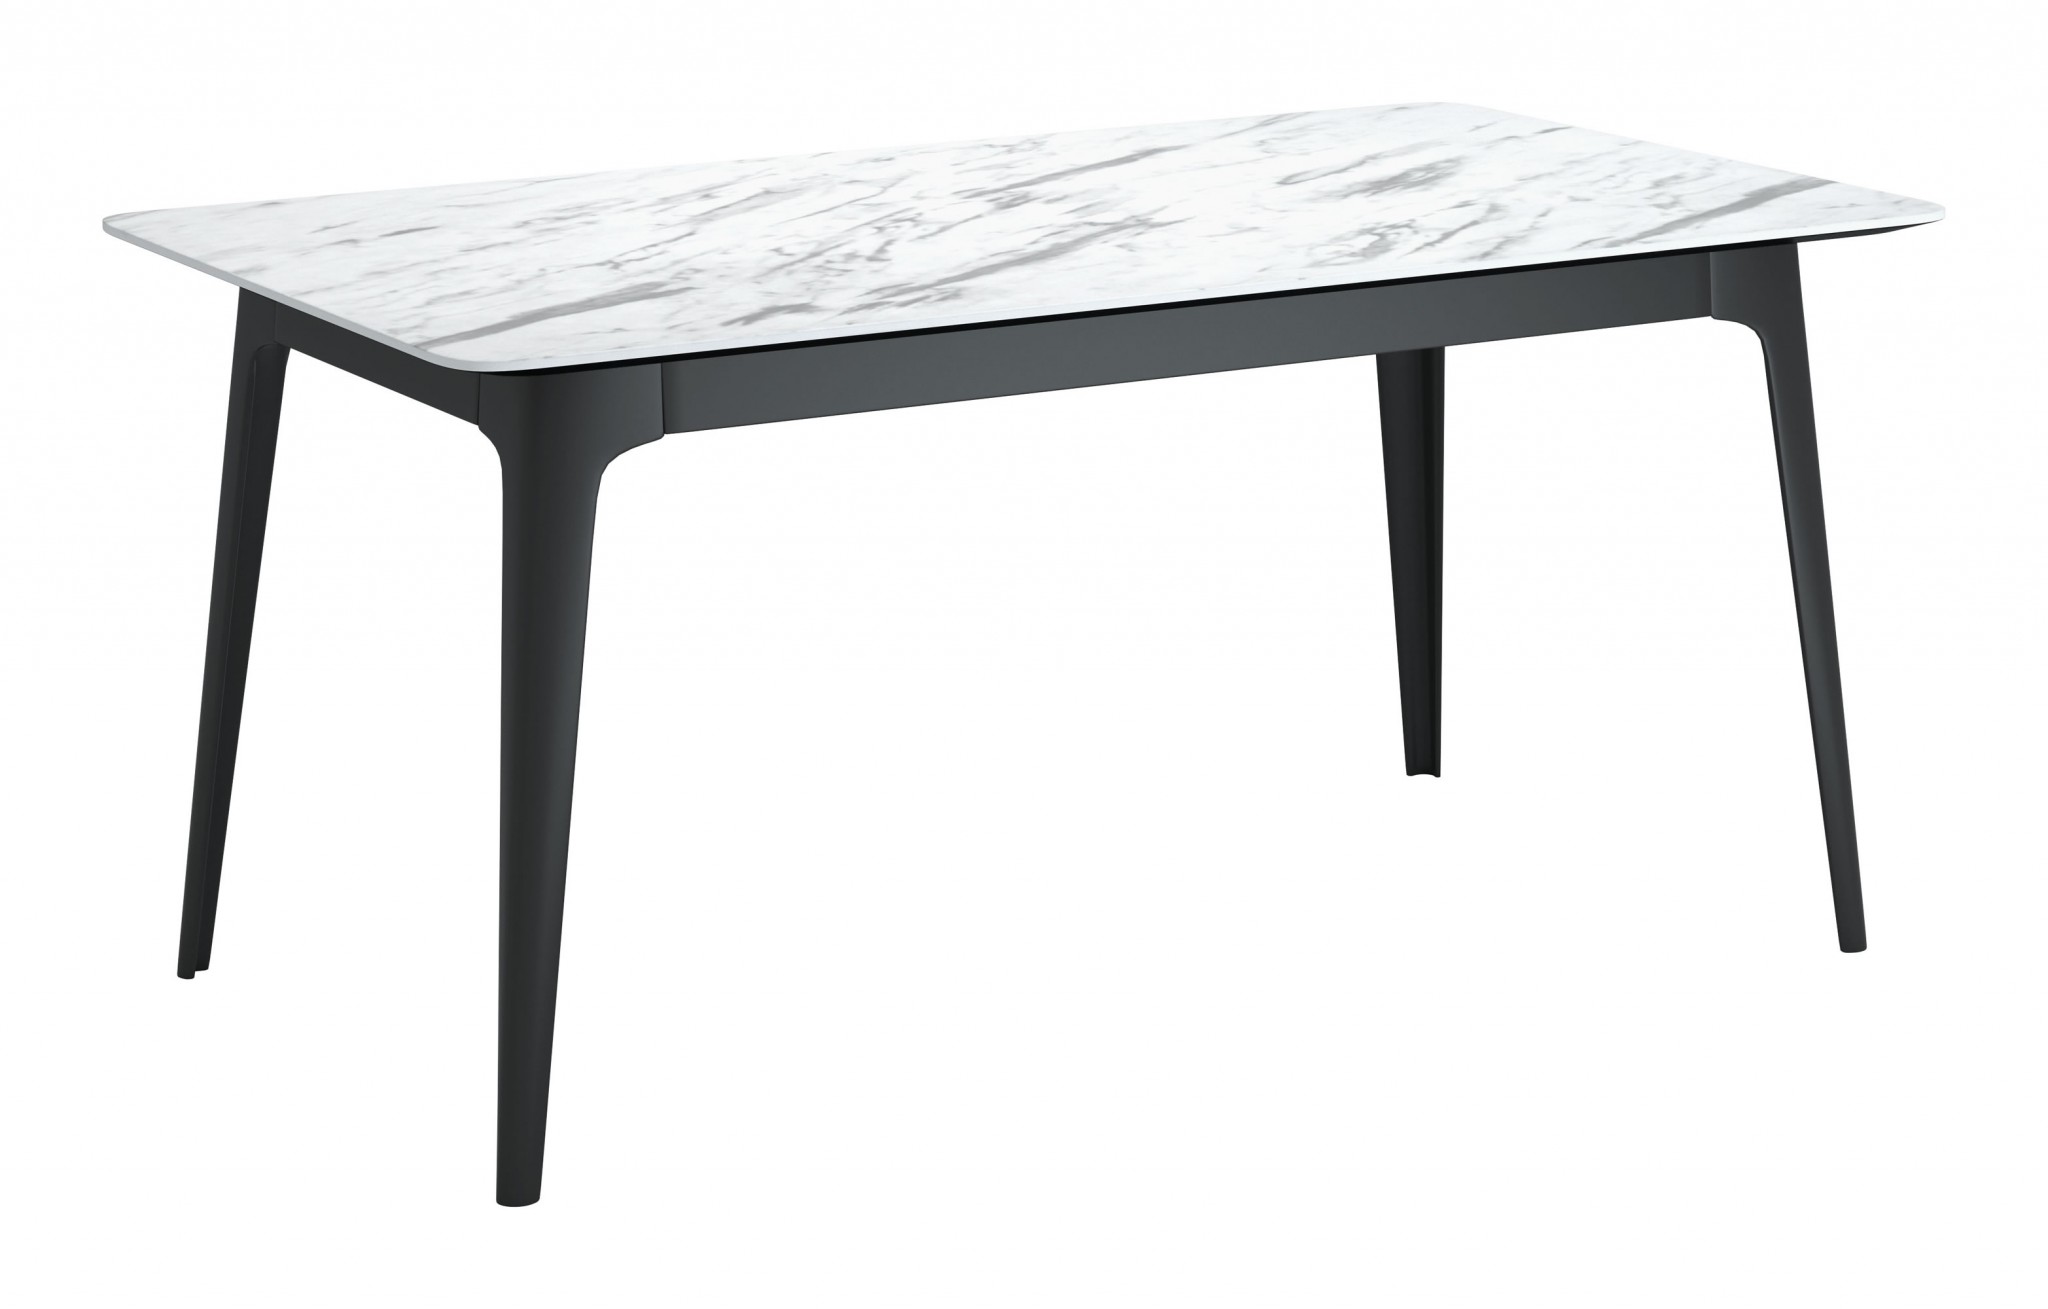 62.8" x 35.2" x 29.7" Stone & Black, MDF & Rubber Wood, Dining Table